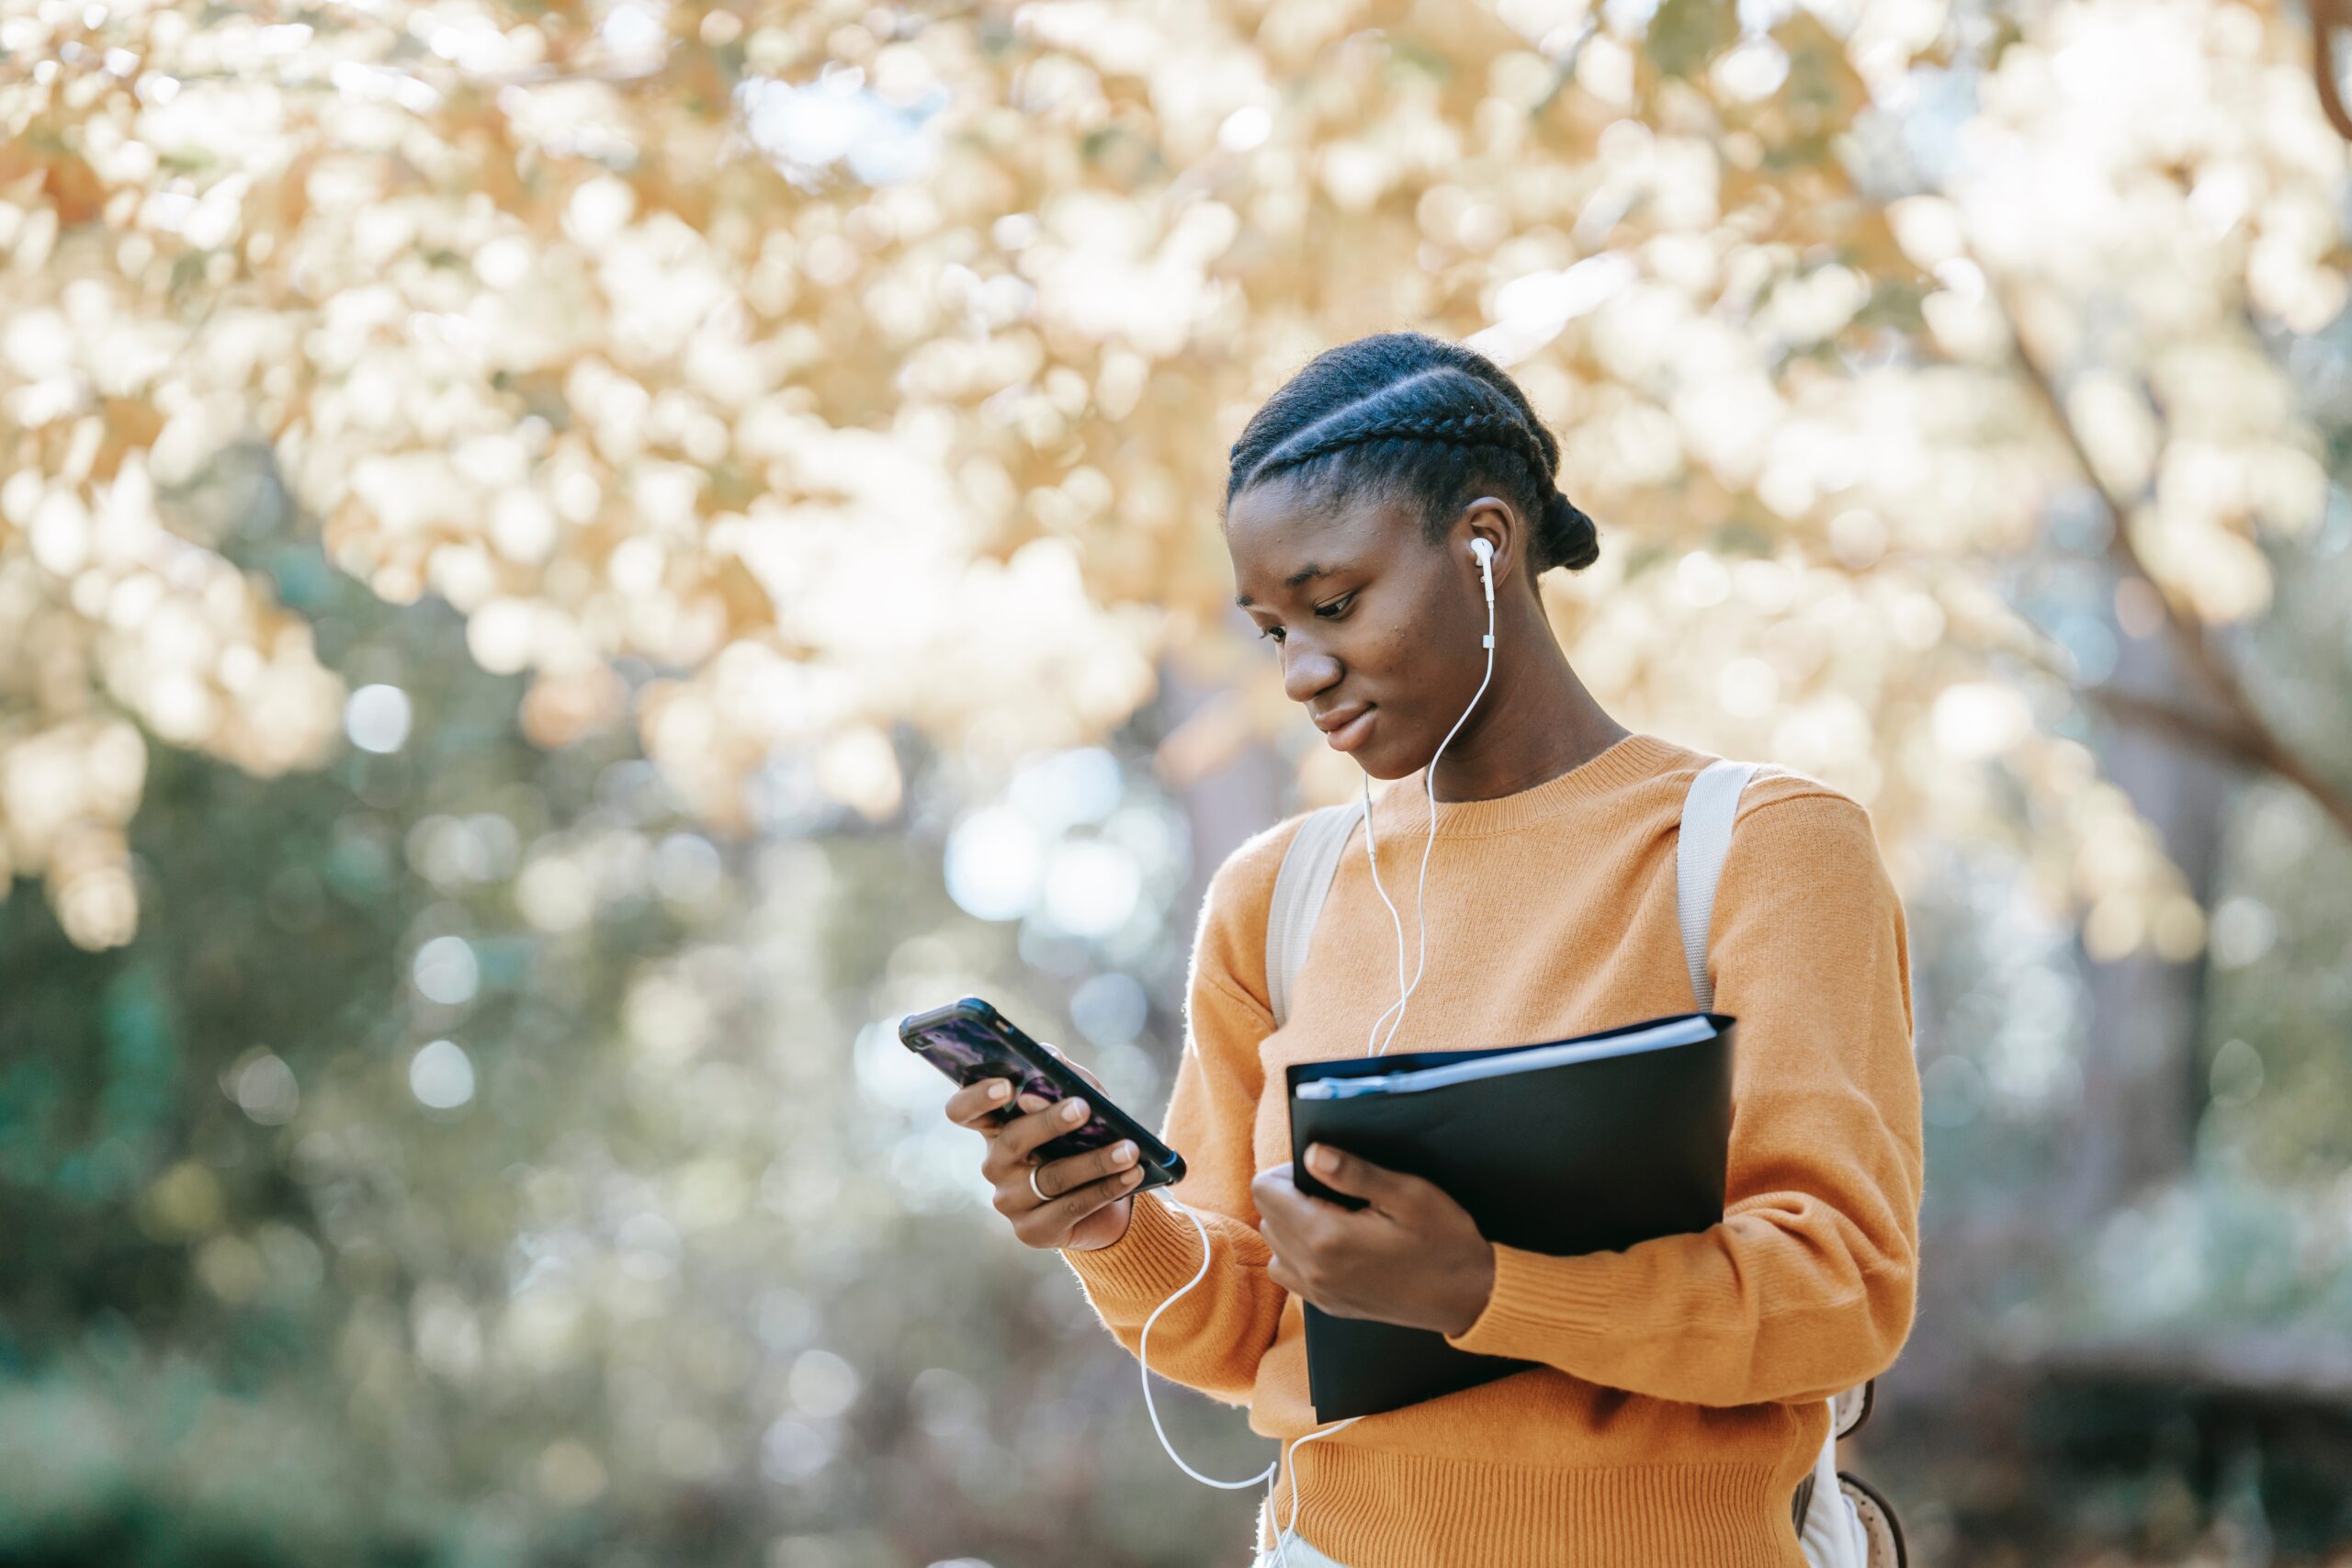 Black student listening to music using smartphone in park